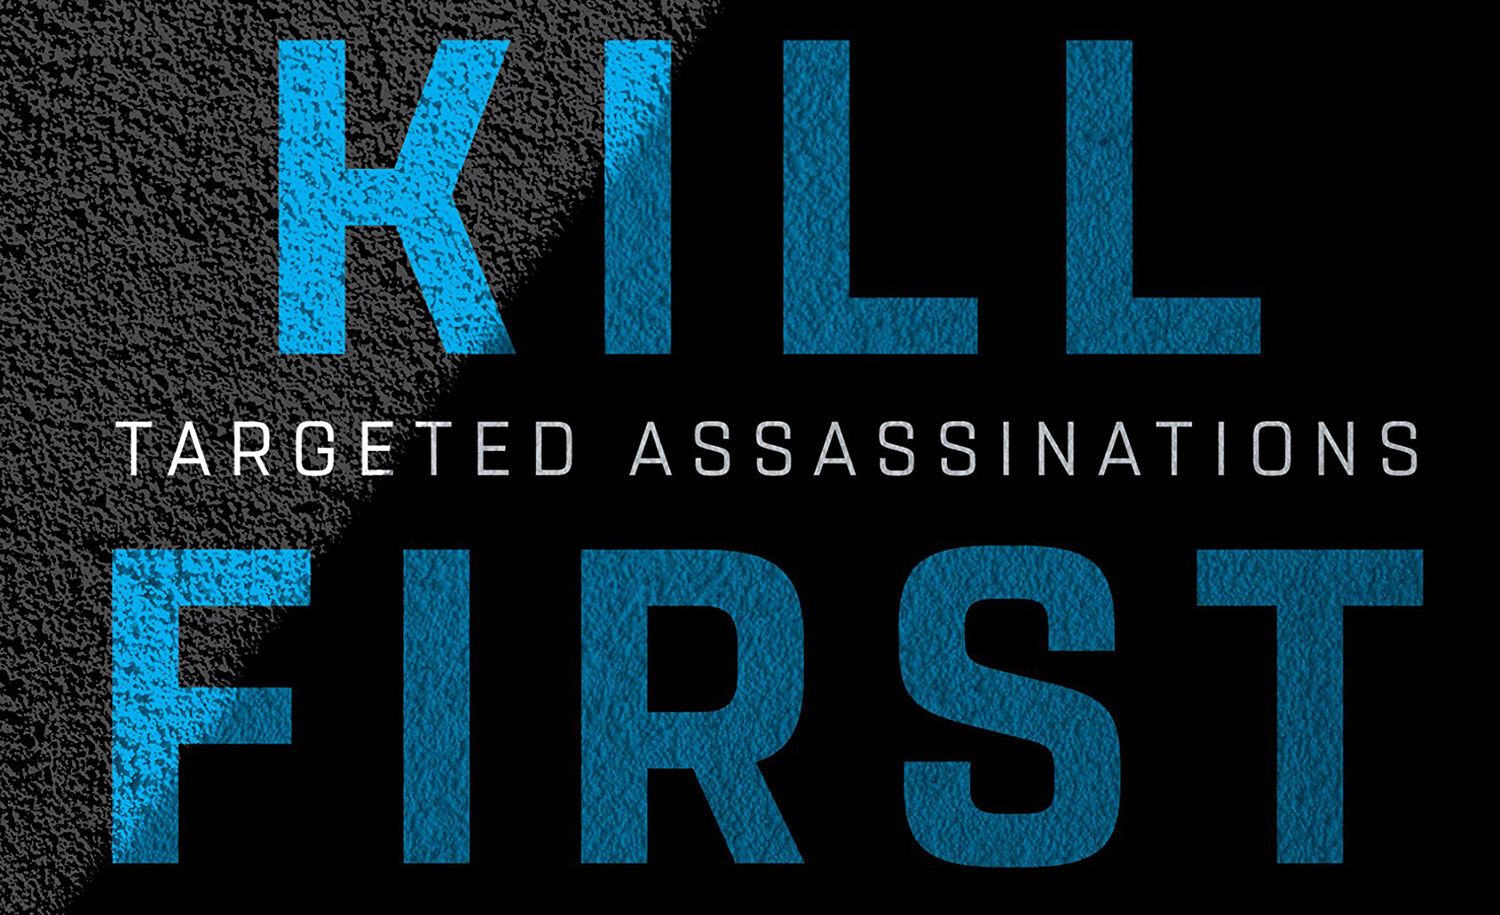 What's Missing from "Rise and Kill First"